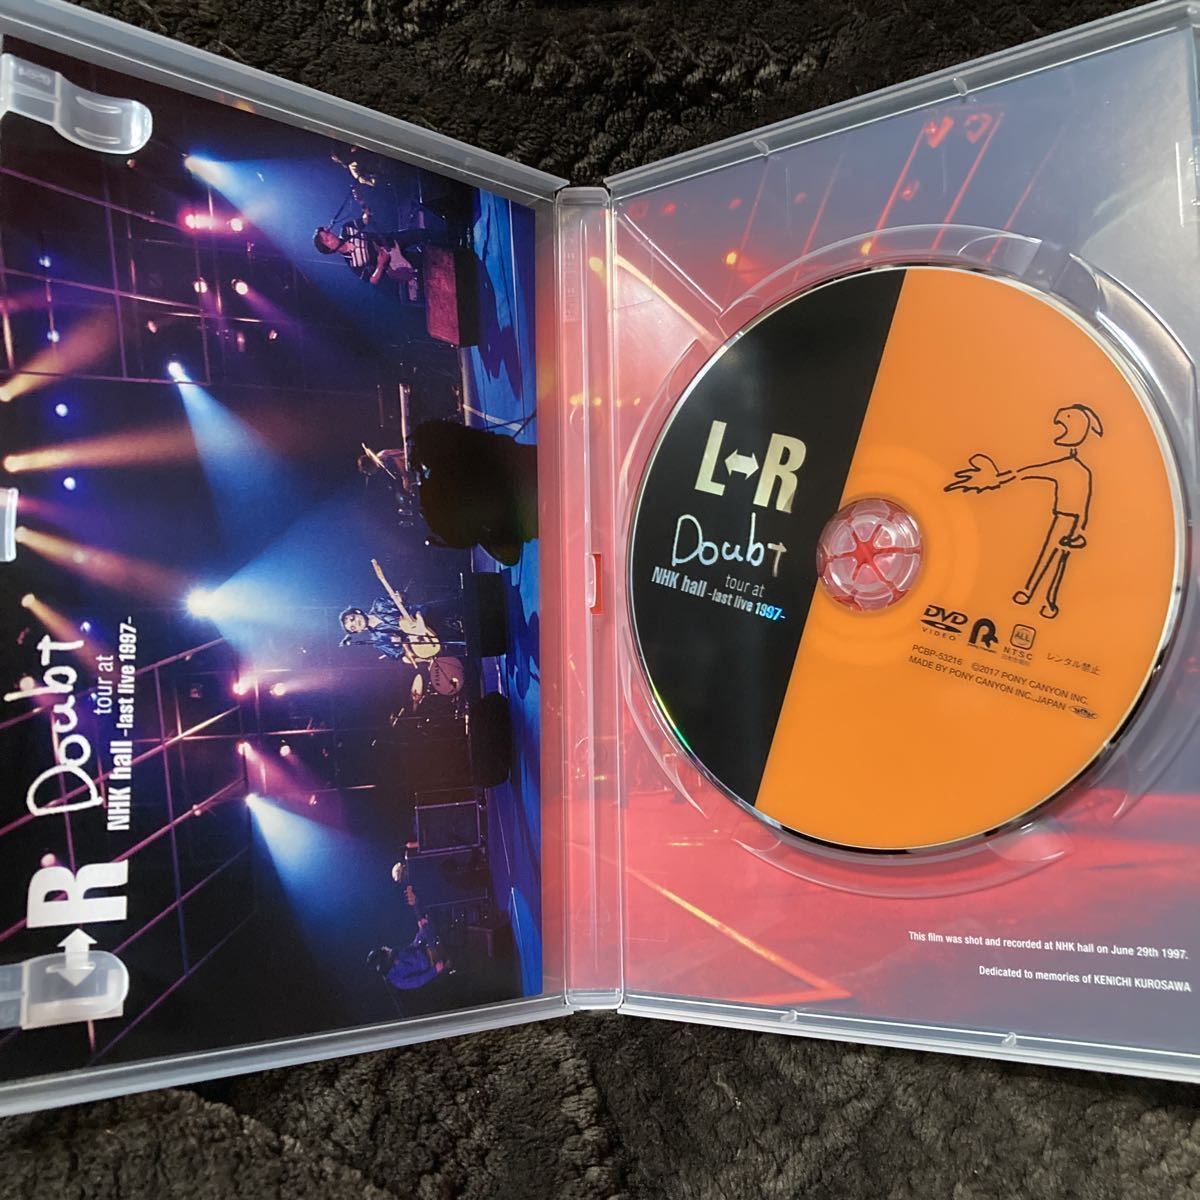 L⇔R ★ DVD 2枚セット【Doubt tour at NHK hall〜last live 1997〜】【live at Budokan Let me Roll it! tour 1996 】◆_画像4